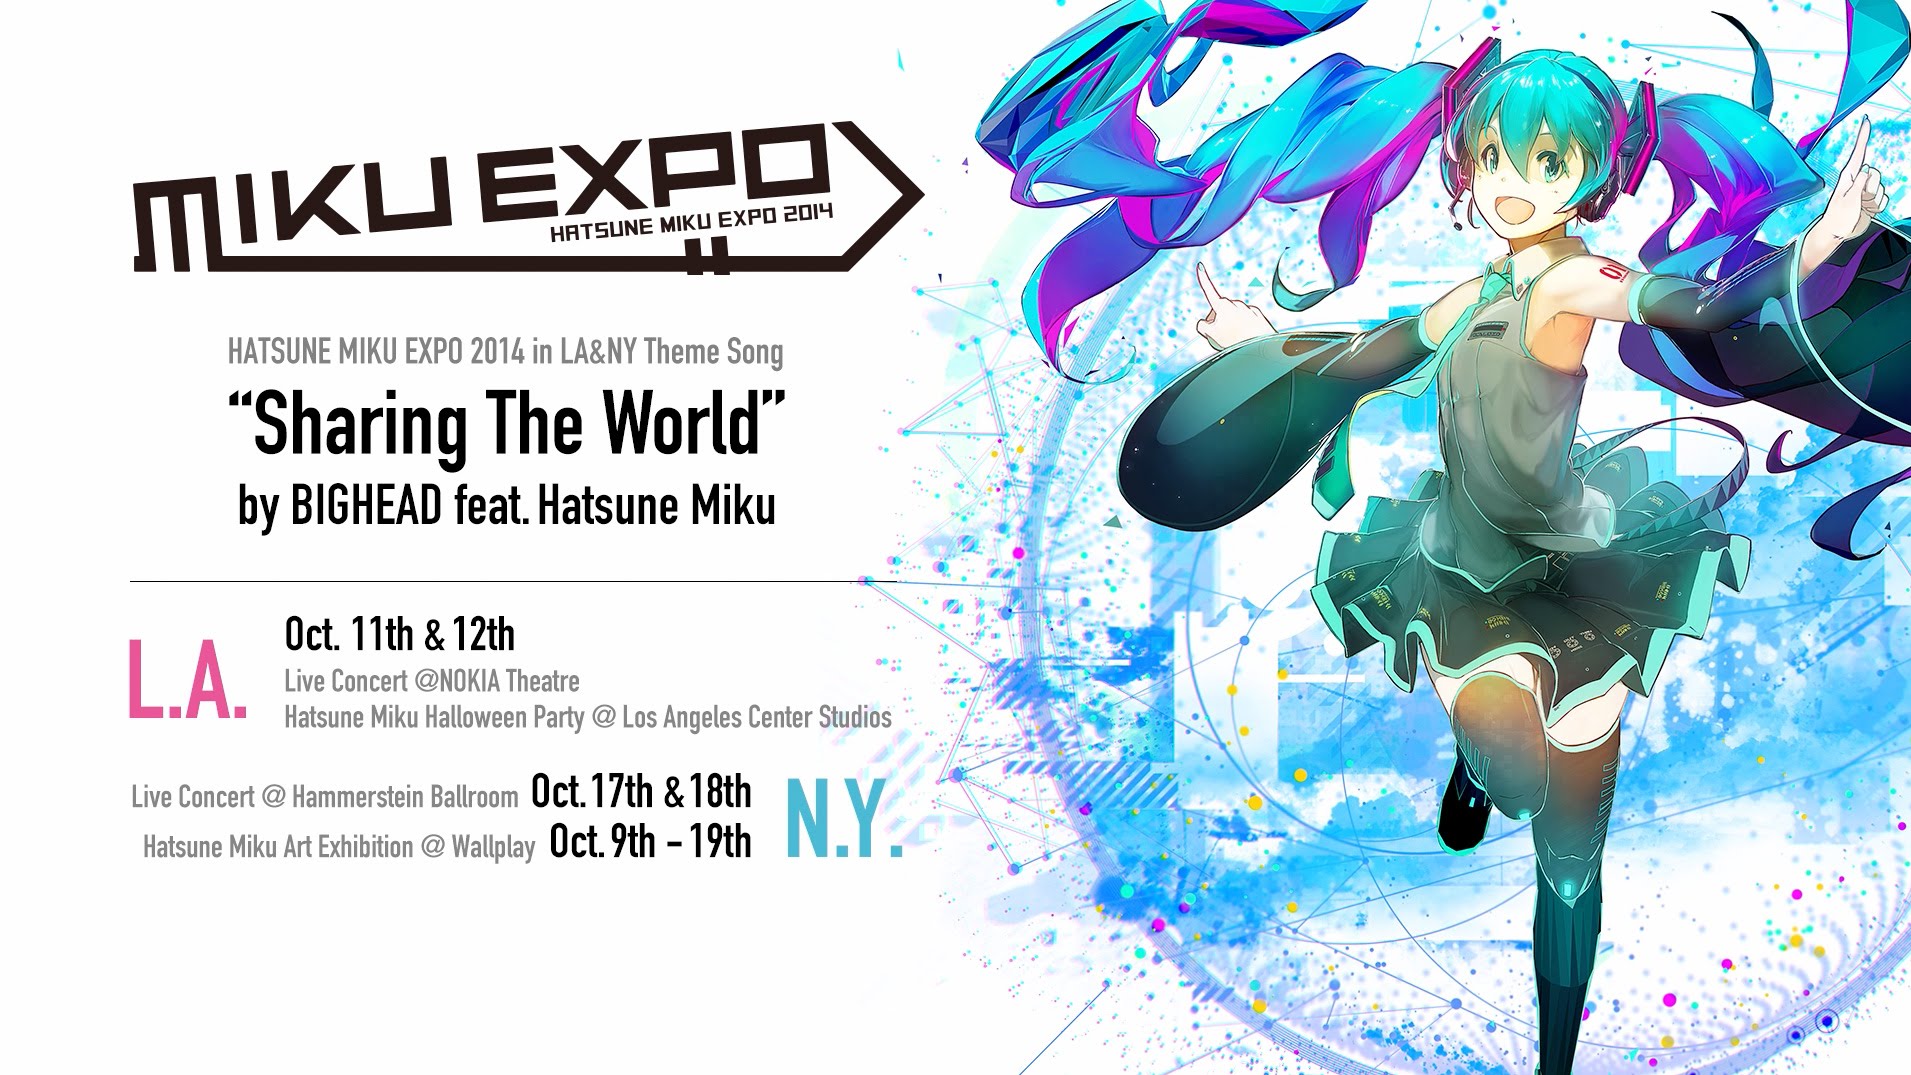 MIKU EXPO 2014 Releases Official Theme Song “Sharing The World” by BIGHEAD feat. Hatsune Miku